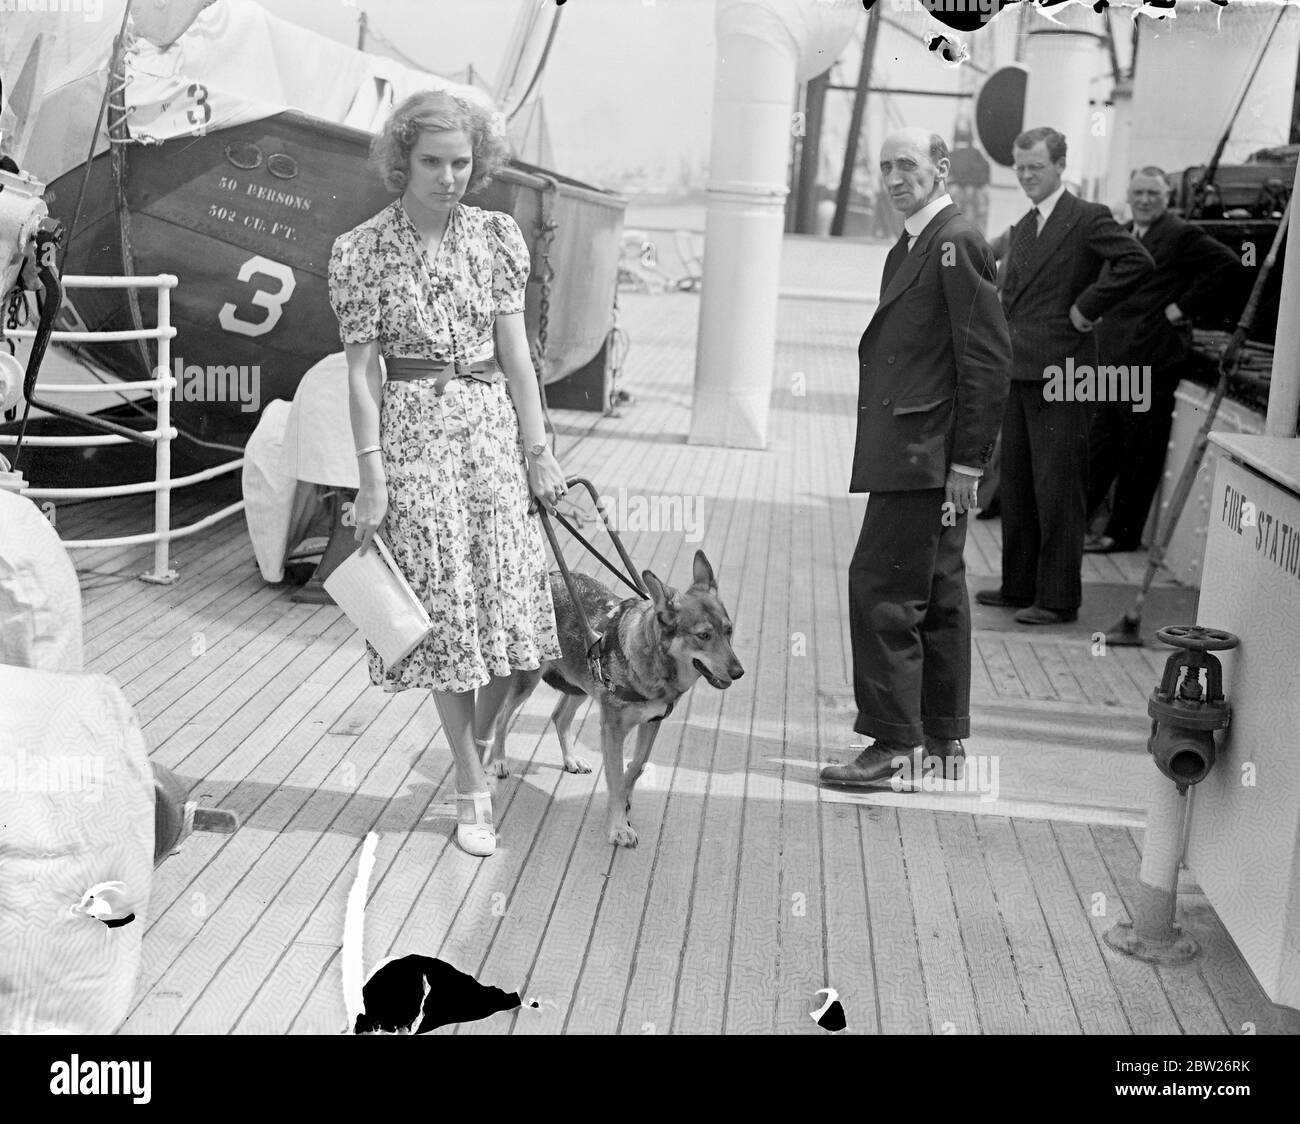 Blind American girl refuses to land in England without dog. Because Ministry of Agriculture officials insist that her dog must go into quarantine for the usual term, Mizz Hazel Hurst, a blind American girl, refuses to land from the liner 'American Merchant' now birth at the Albert Dock, London. The Alsation dog, Babe, acts as Miss Hurst's guide and friend may have travelled 80,000 miles together. An appeal is being made to the Ministry to waive the law in this case. Miss Hurst says she is ready to go back to America if Babe is not allowed to land. 2 August 1938 Stock Photo